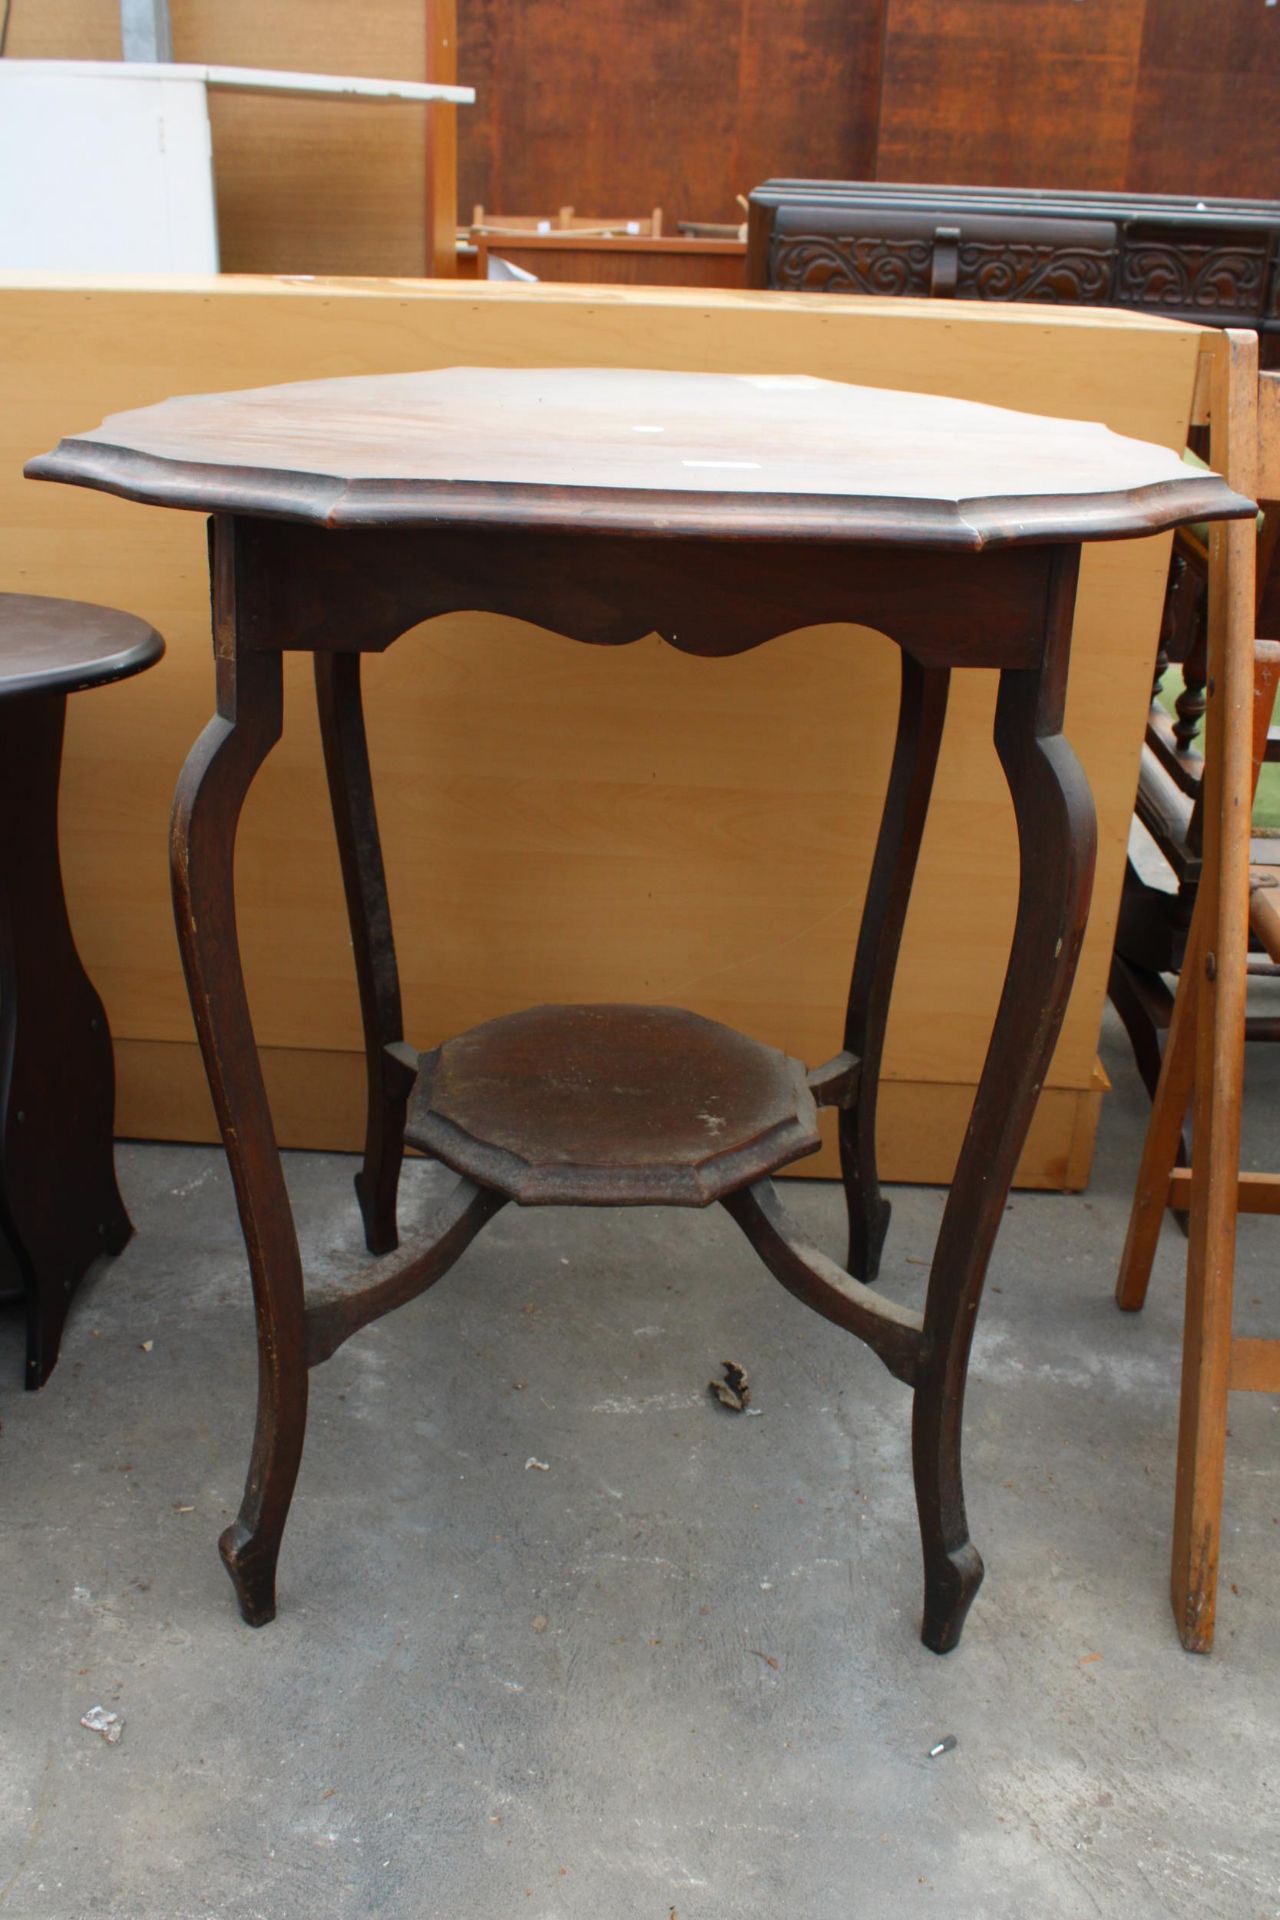 A LATE VICTORIAN MAHOGANY TWO TIER CENTRE TABLE 27" ACROSS - Image 2 of 2